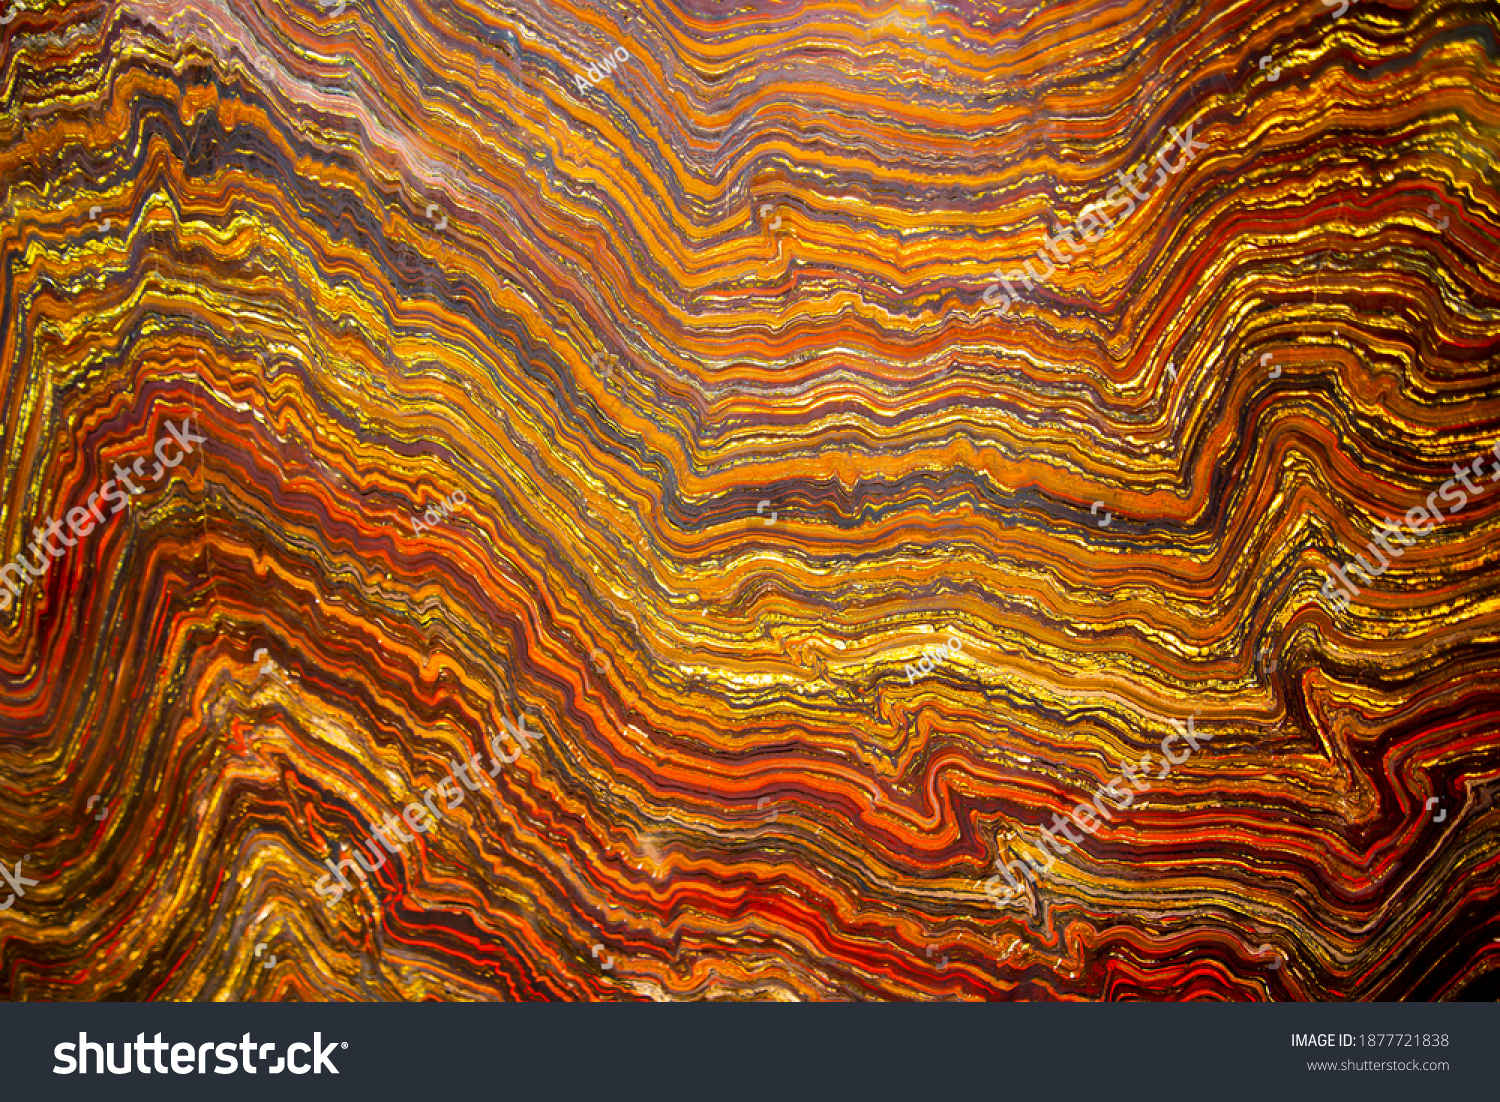 Archean Banded Iron Formation Rock #1877721838